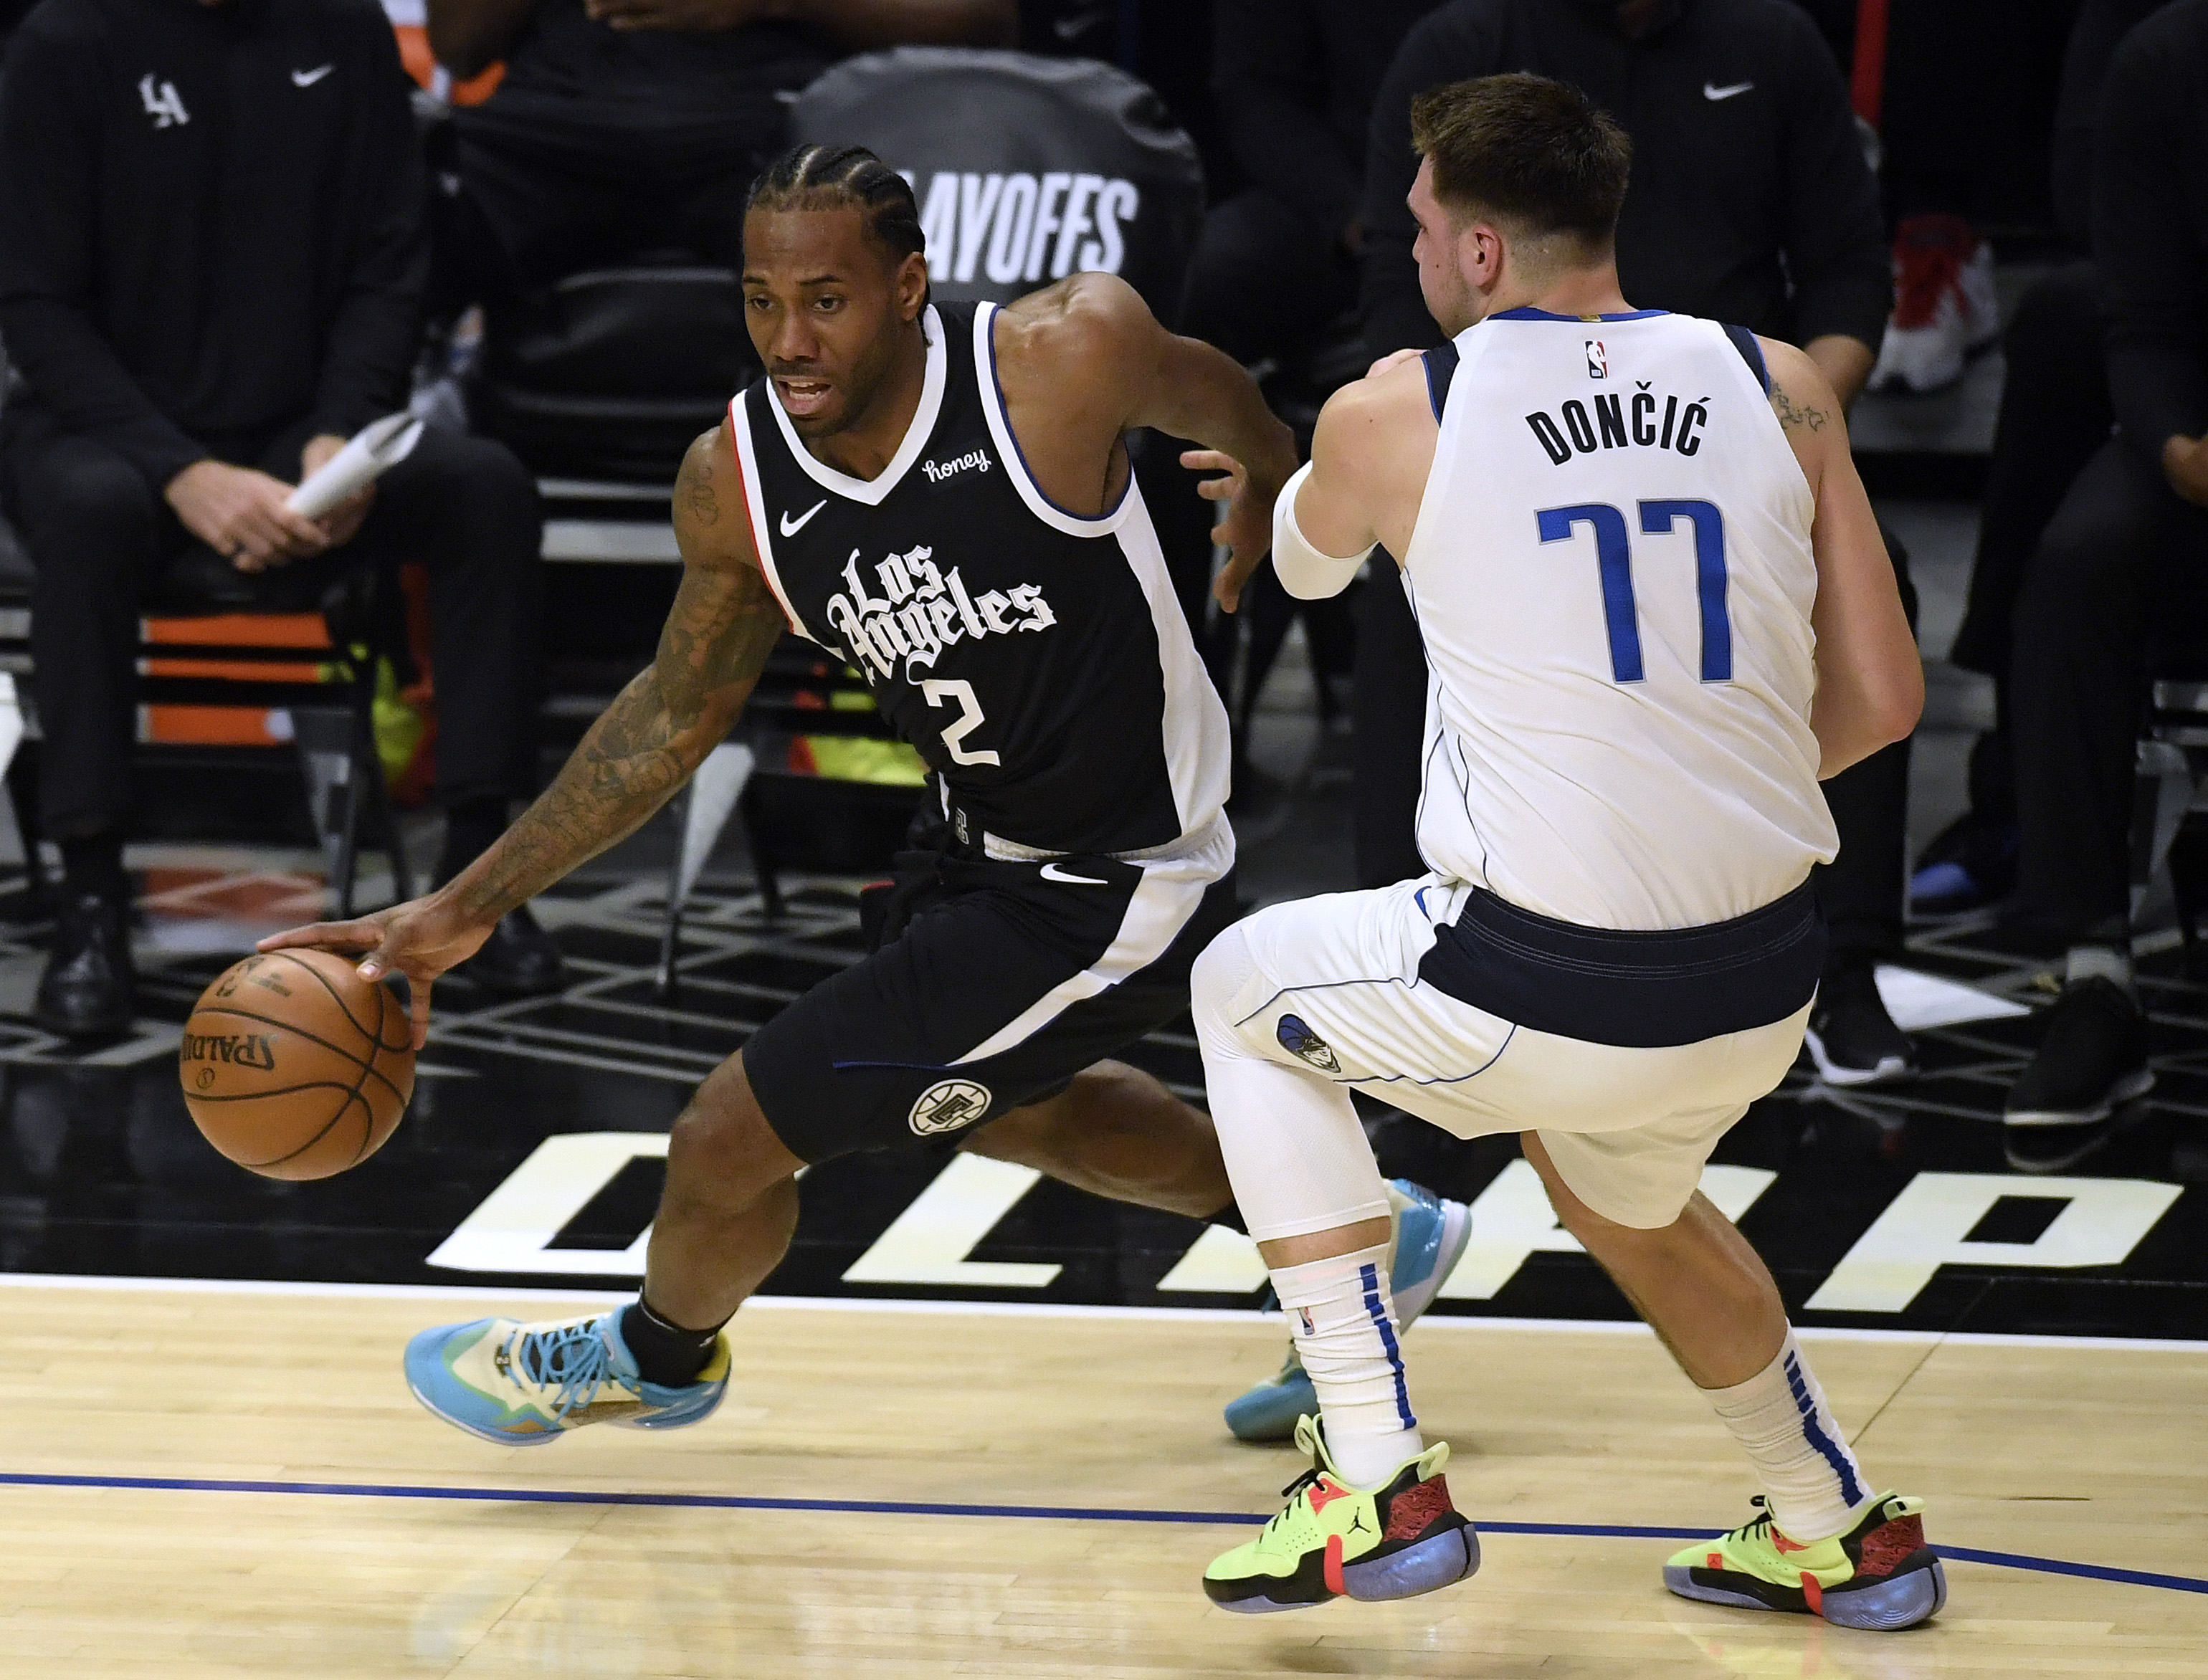 Los Angeles Clippers vs Dallas Mavericks free live stream, Game 2 score, odds, time, TV channel, how to watch NBA playoffs online (5/25/21)